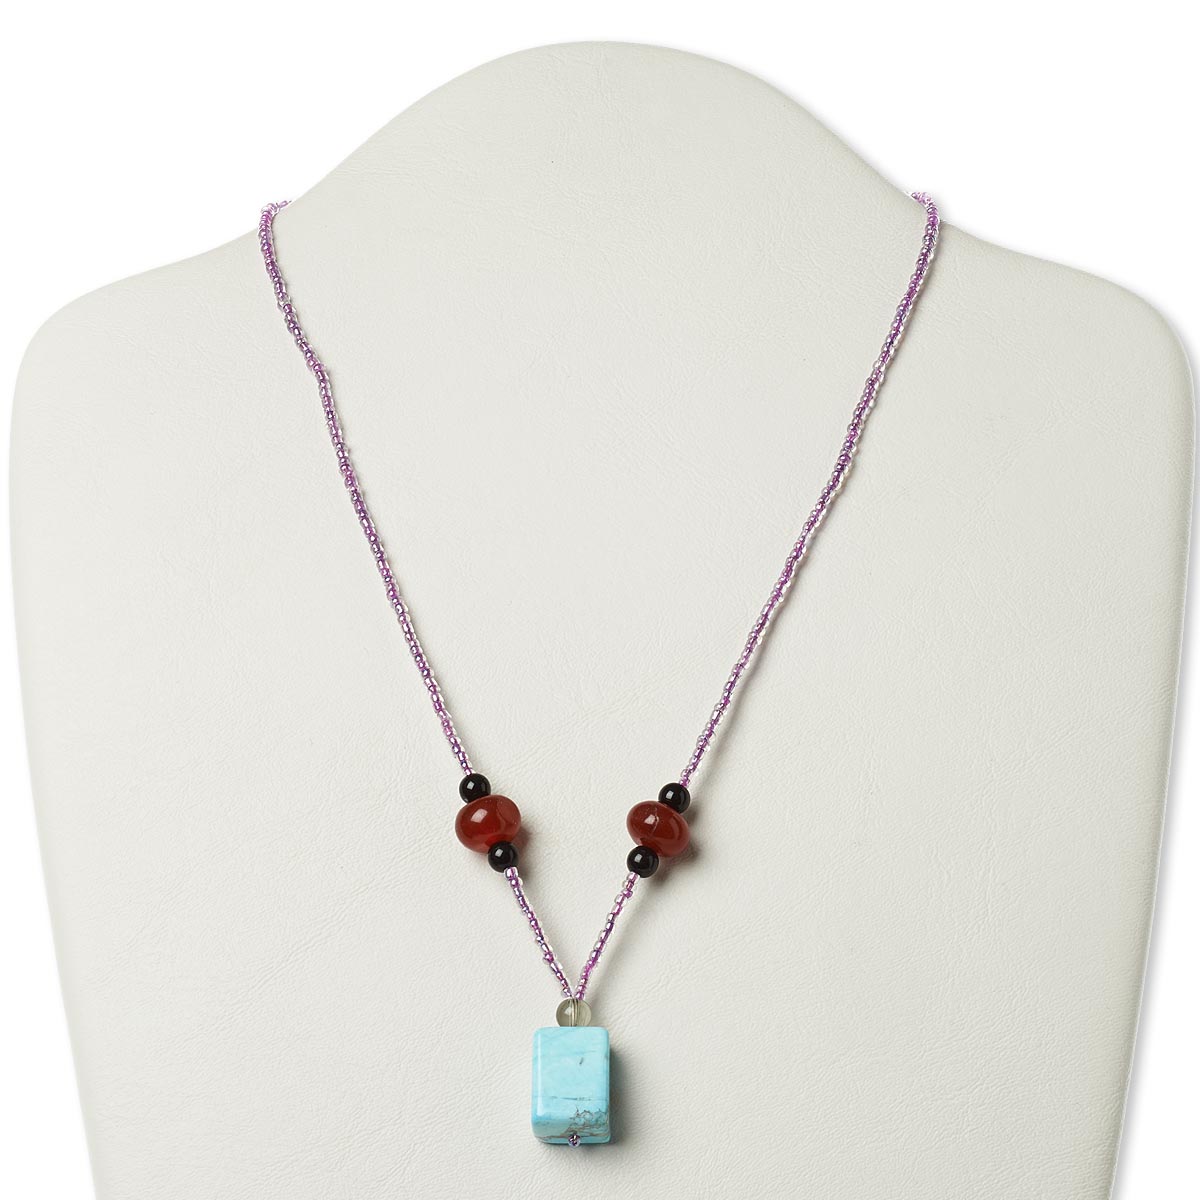 Necklace, multi-gemstone (natural / dyed / stabilized) / glass / silver ...